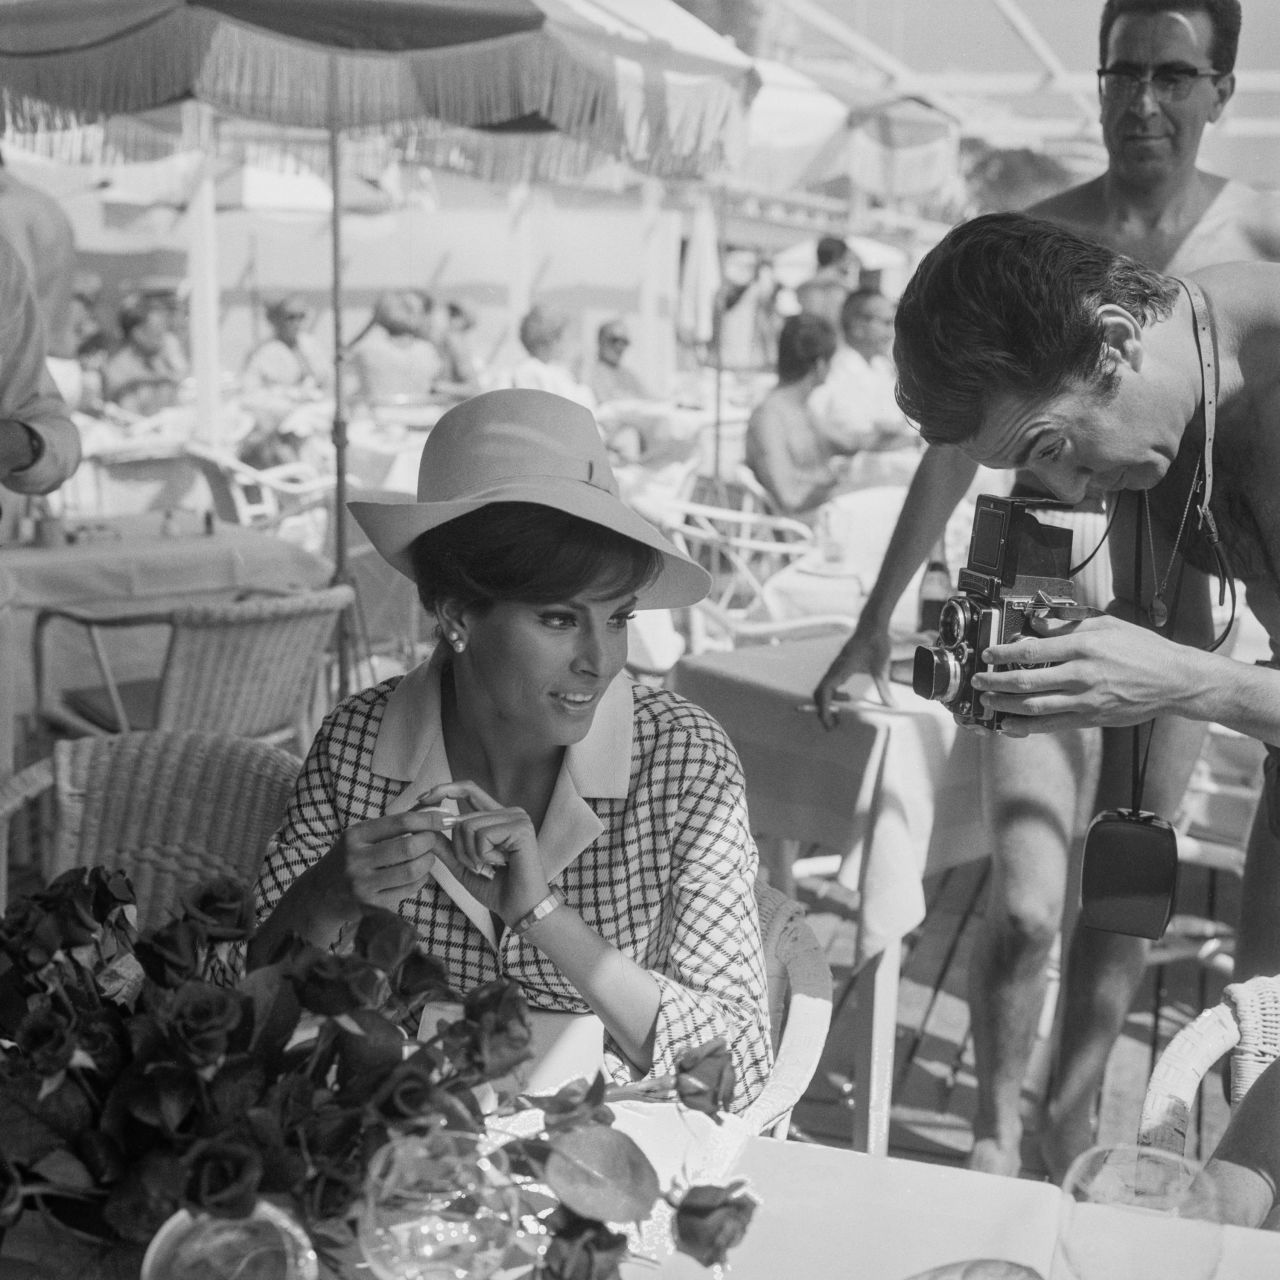 Welch is photographed at the Cannes Film Festival in 1966.